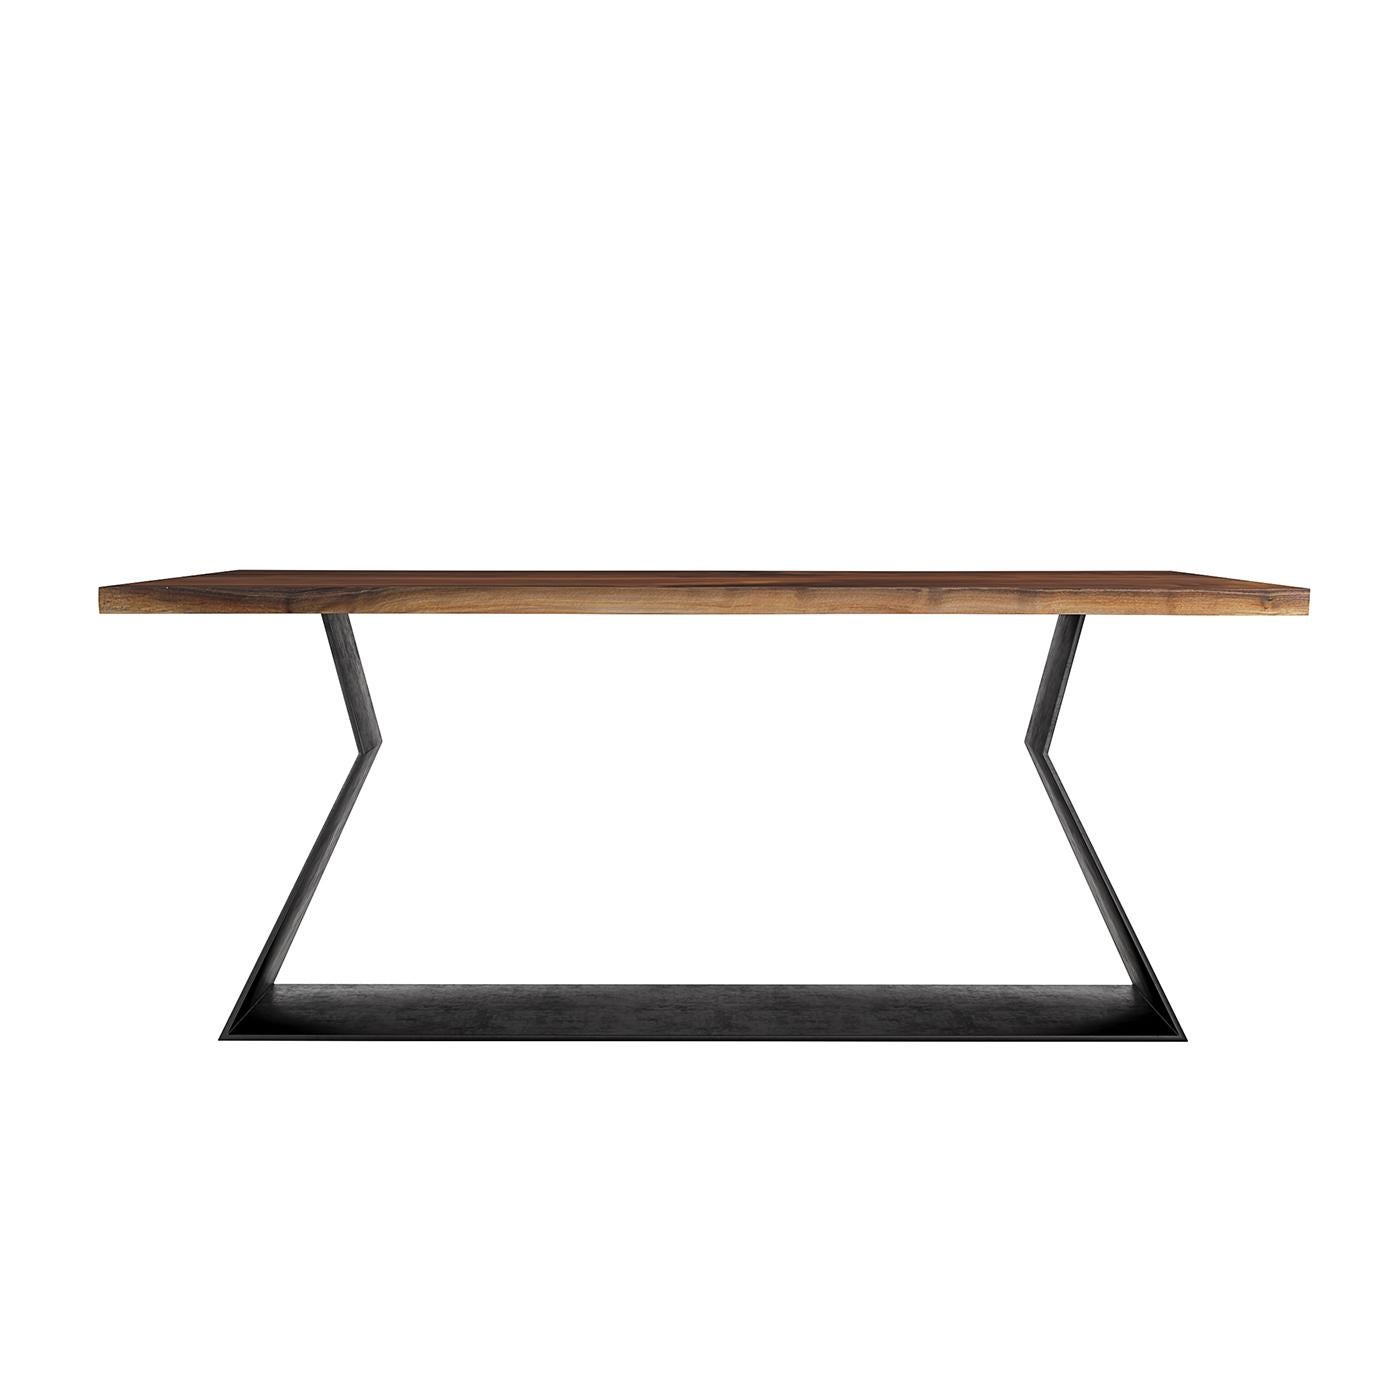 Part minimalist and part industrial-inspired, the Ellen Table combines simplicity with high quality materials and finishing, owning its structural solidity to the black powder-coated, 8mm-thick metal base, worked and shaped by hand in a captivating